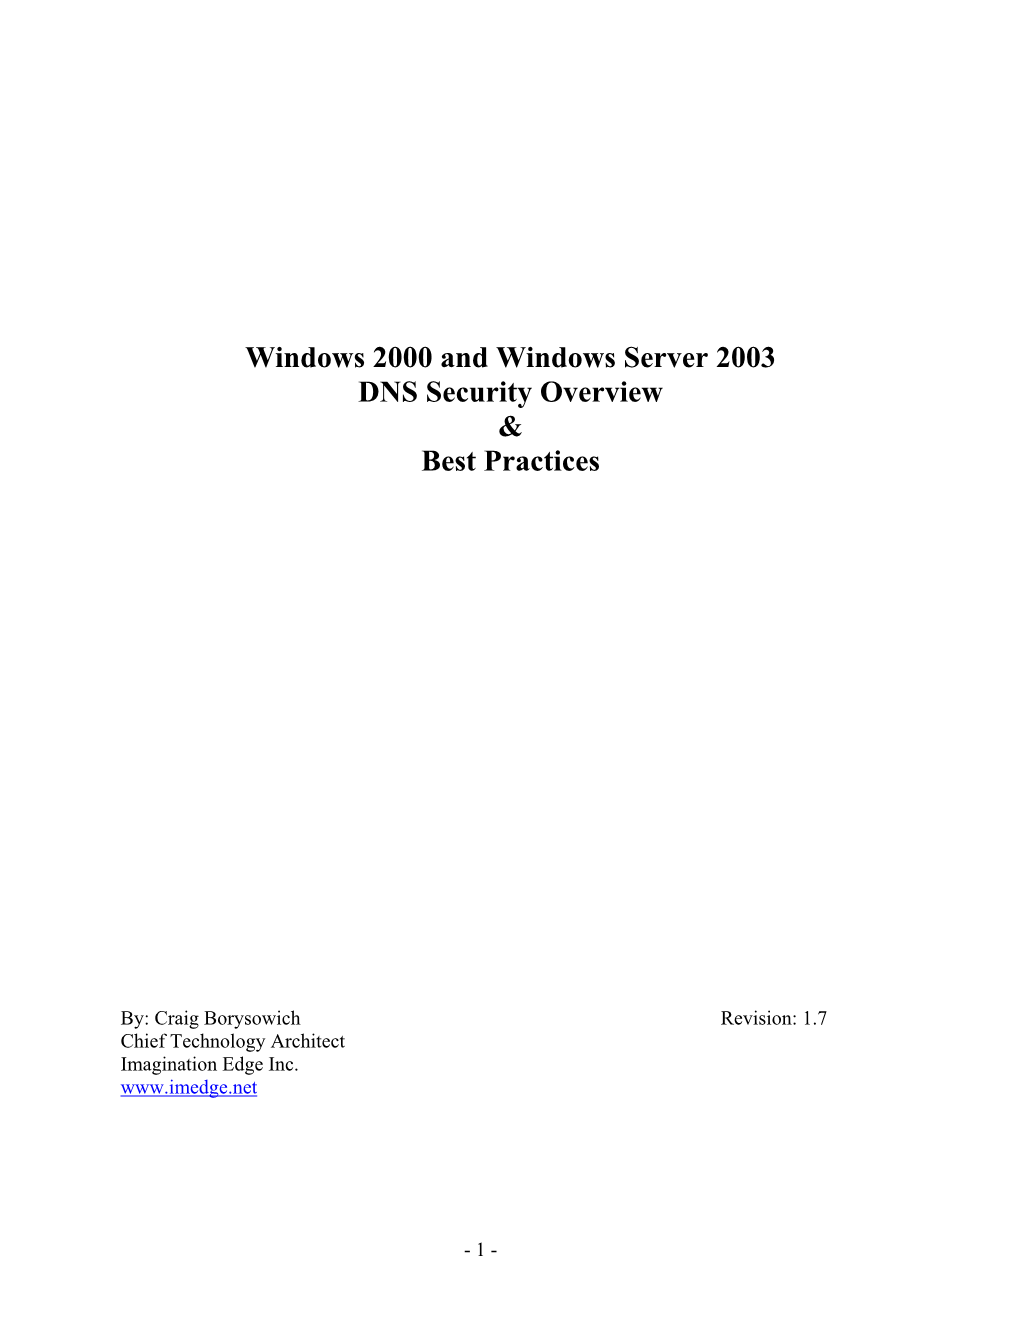 Windows 2000 and Windows Server 2003 DNS Security Overview & Best Practices